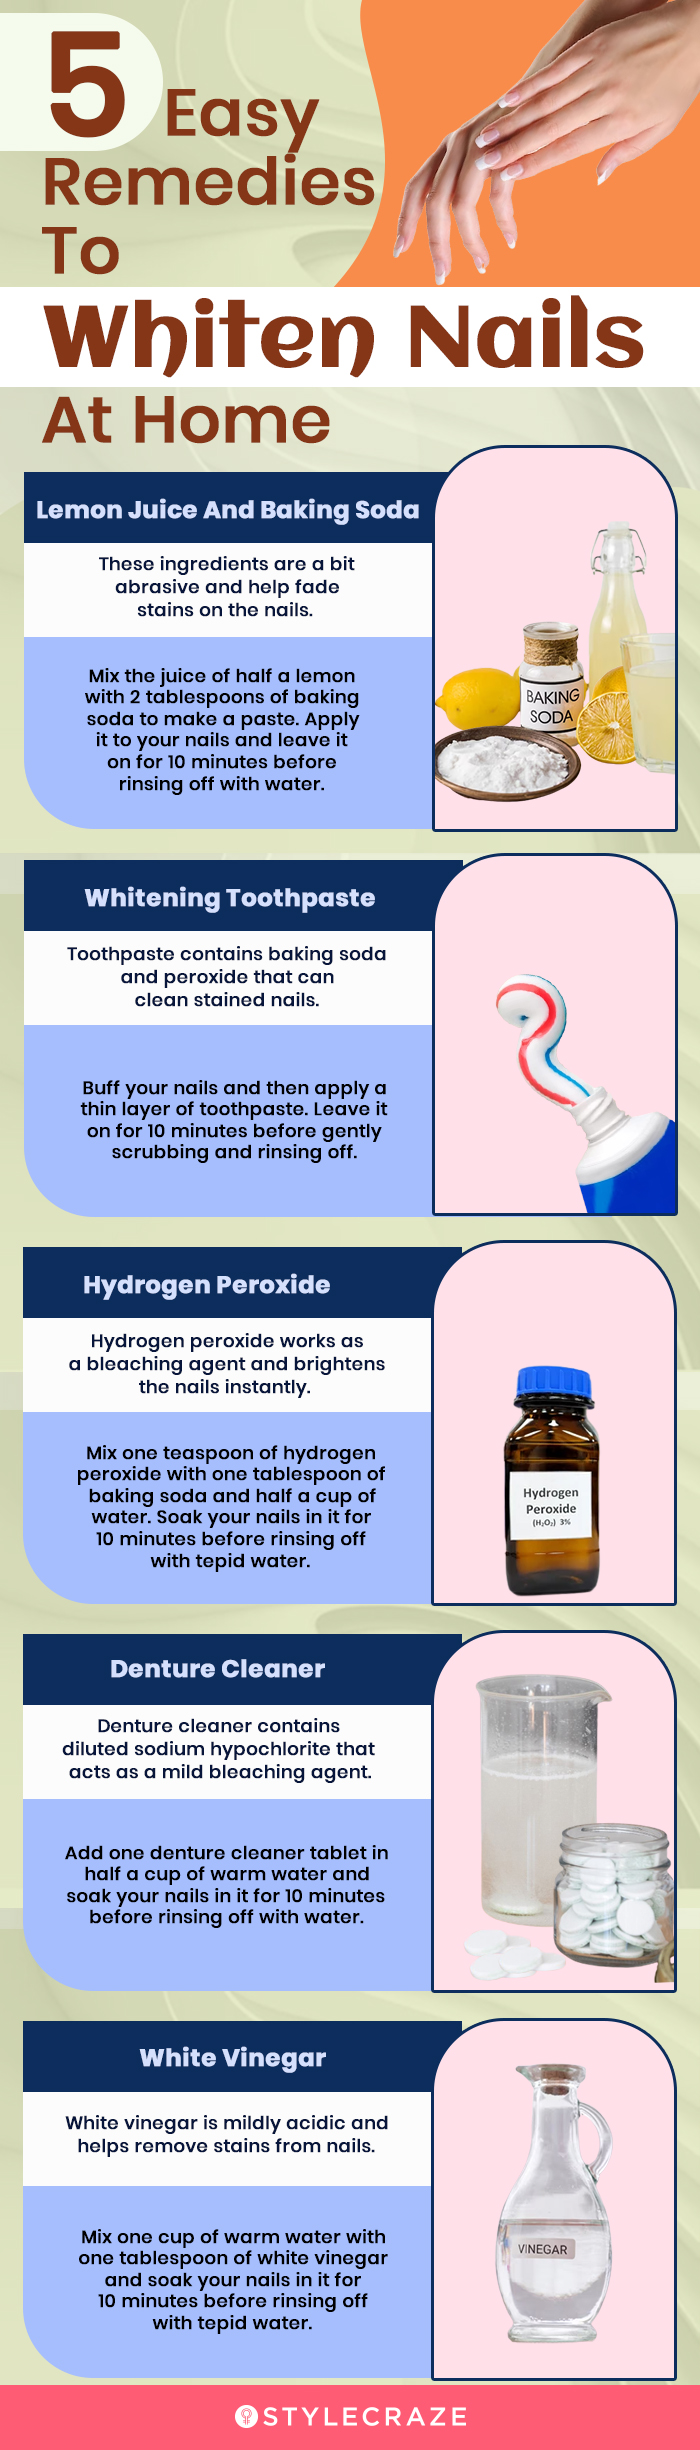 5 easy remedies to whiten nails at home (infographic)